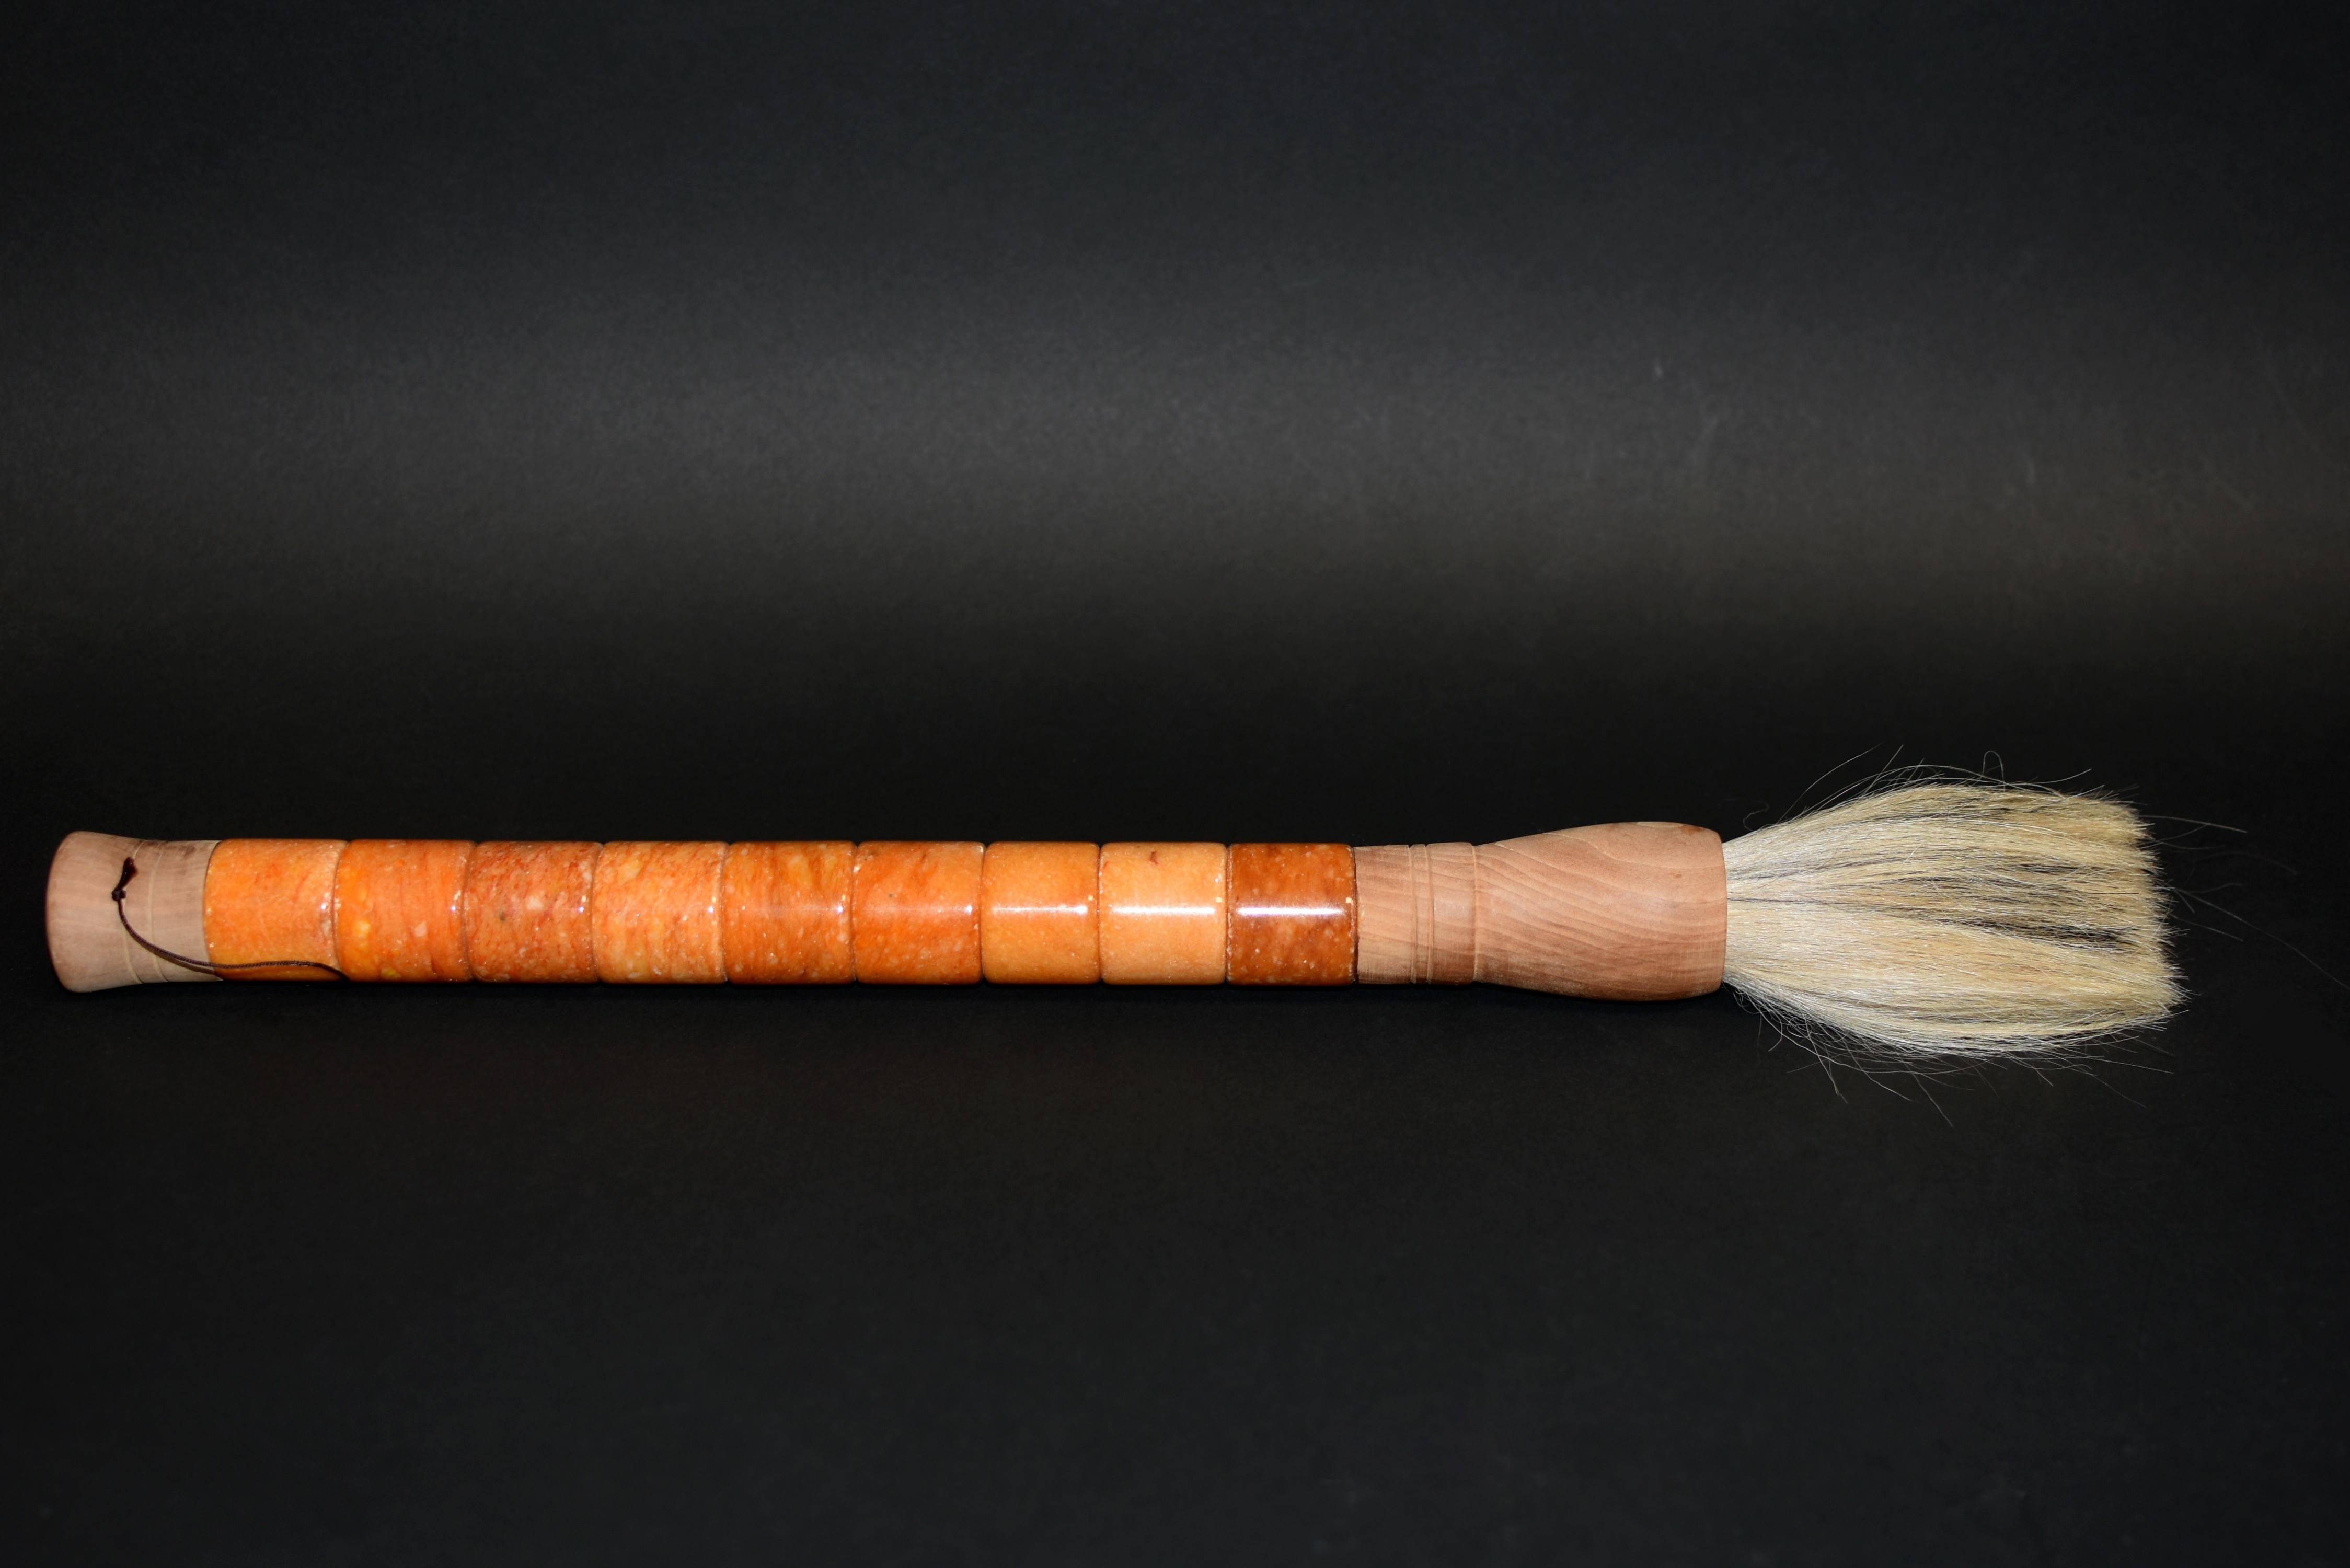 Beautiful hand made extra large Chinese calligraphy brush with stunning butterscotch colored marble archer's rings. Handle is made of 9 large stones, each 1.5